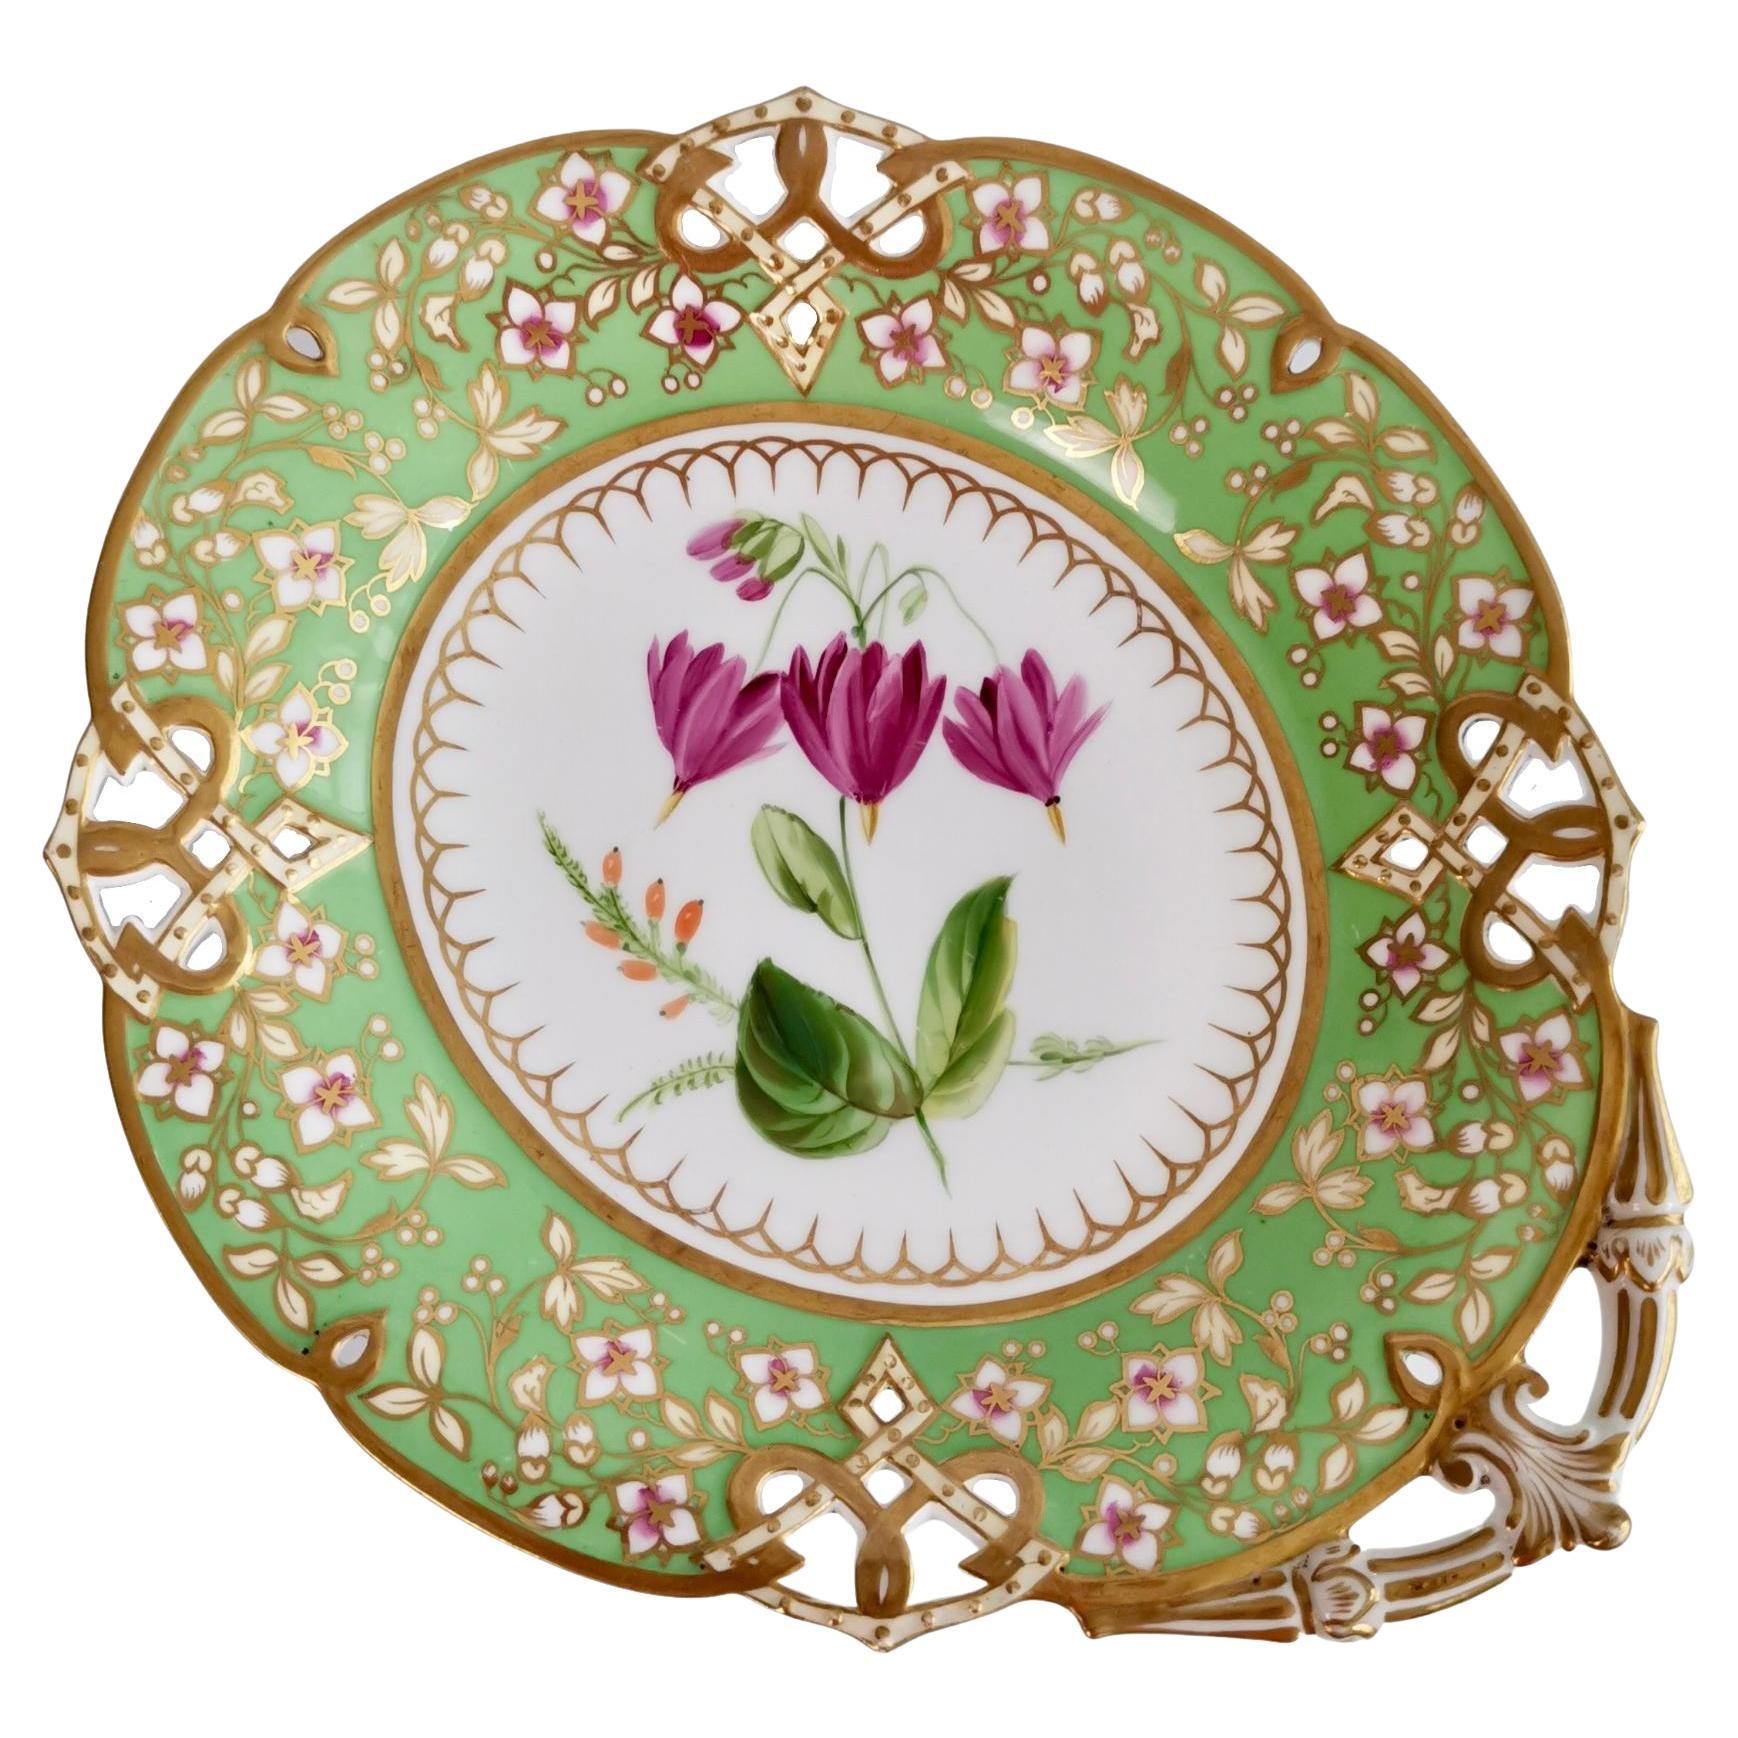 Samuel Alcock Low Comport, Green with Flowers, Pierced Persian Revival ca 1855